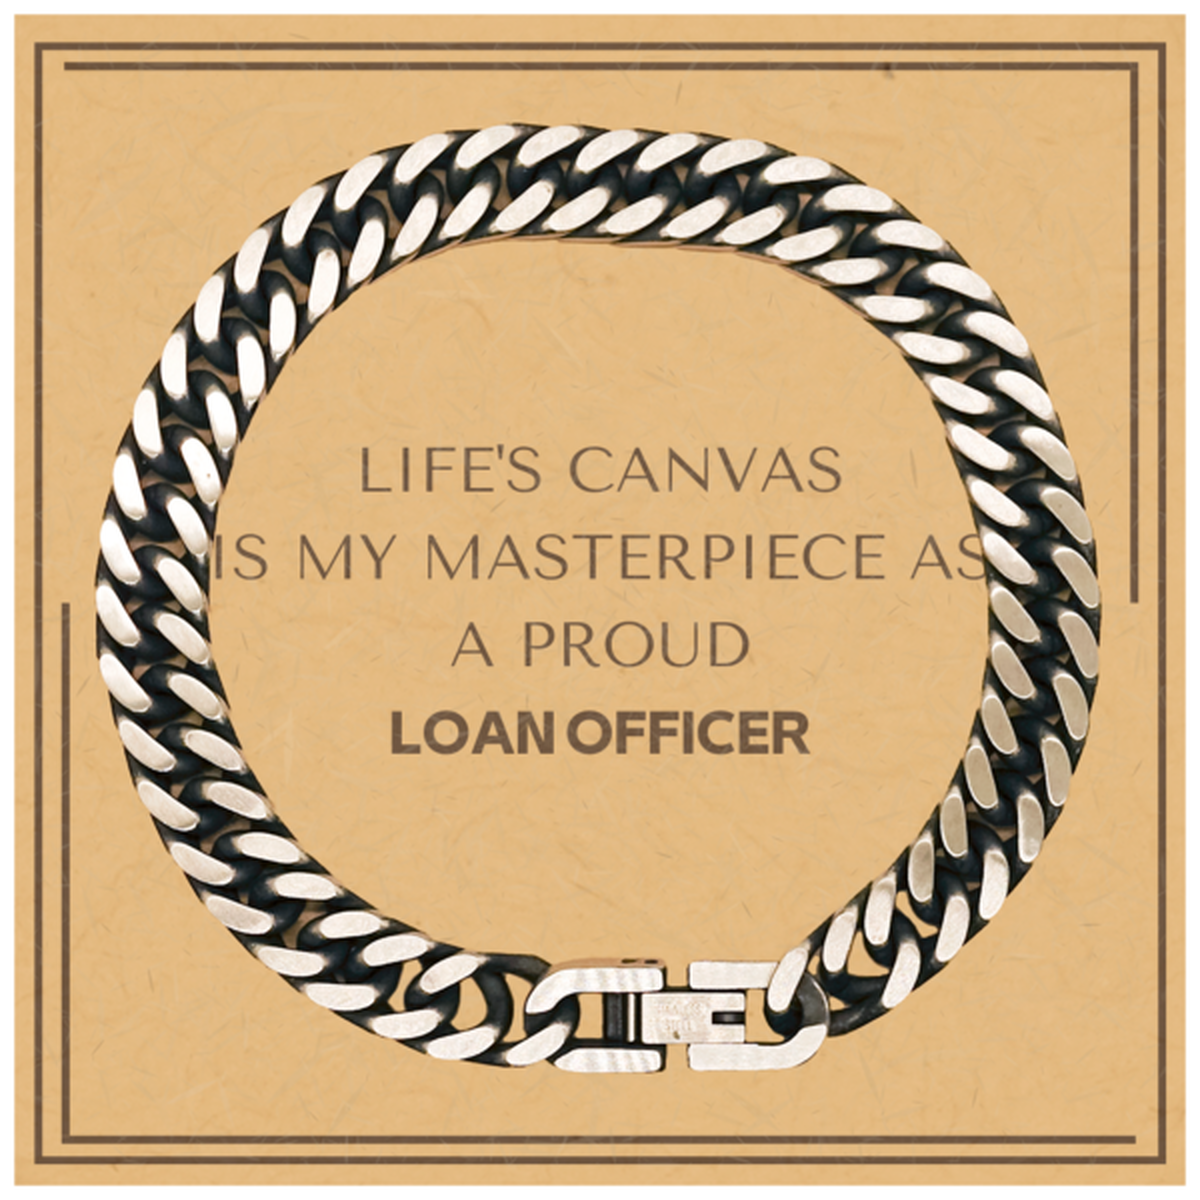 Proud Loan Officer Gifts, Life's canvas is my masterpiece, Epic Birthday Christmas Unique Cuban Link Chain Bracelet For Loan Officer, Coworkers, Men, Women, Friends